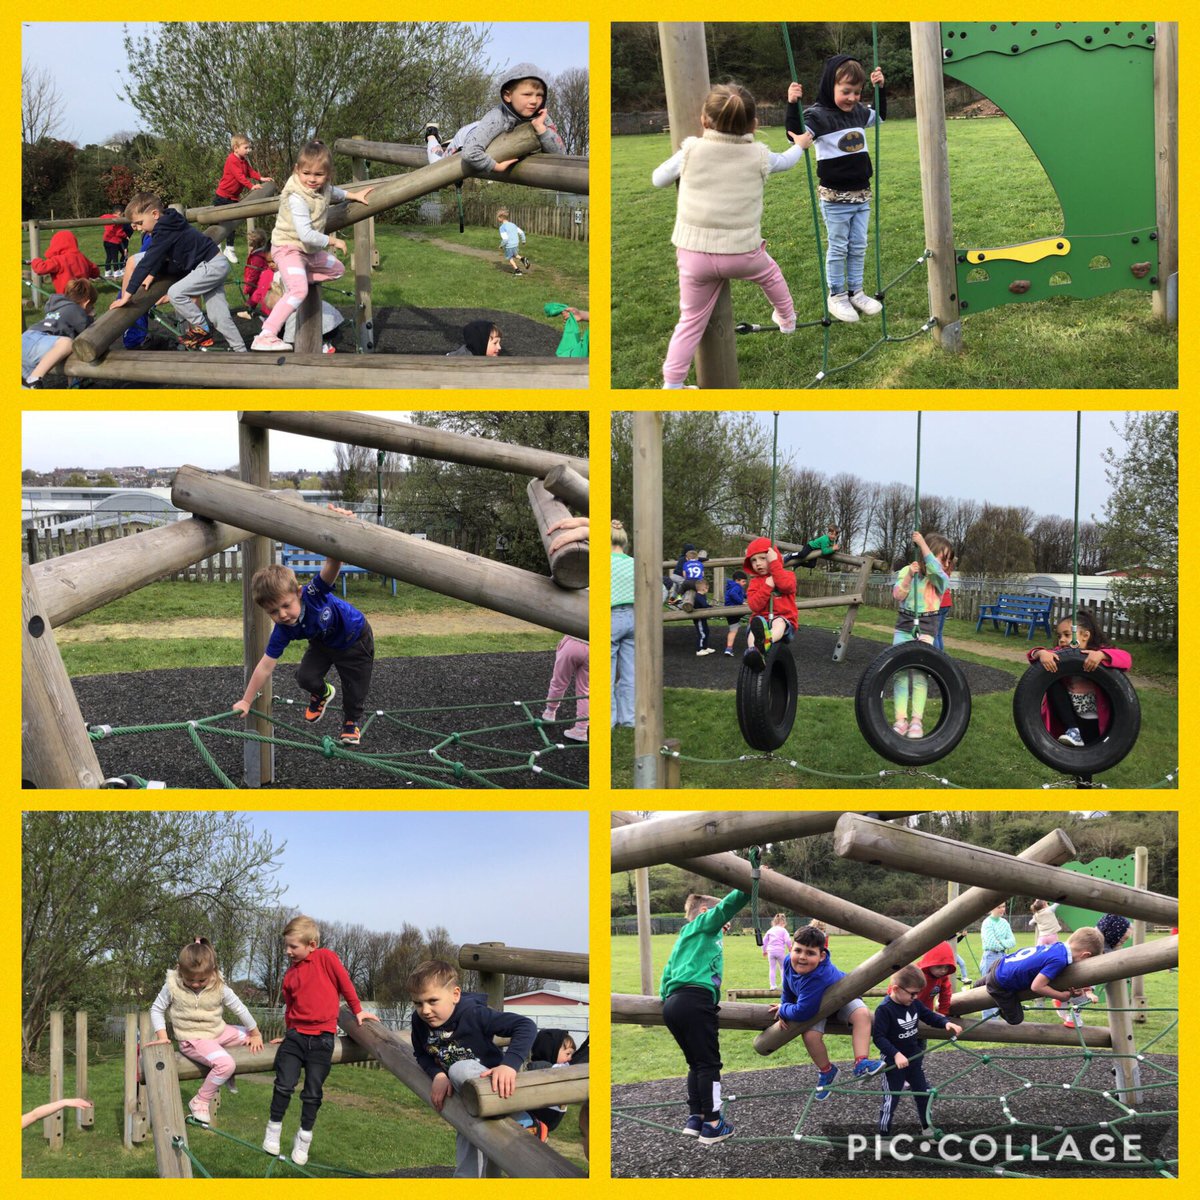 Super session on the trim trail today! Working on our coordination, balancing and gross motor skills 🙌 #healthyconfidentindividuals #HealthyHarri